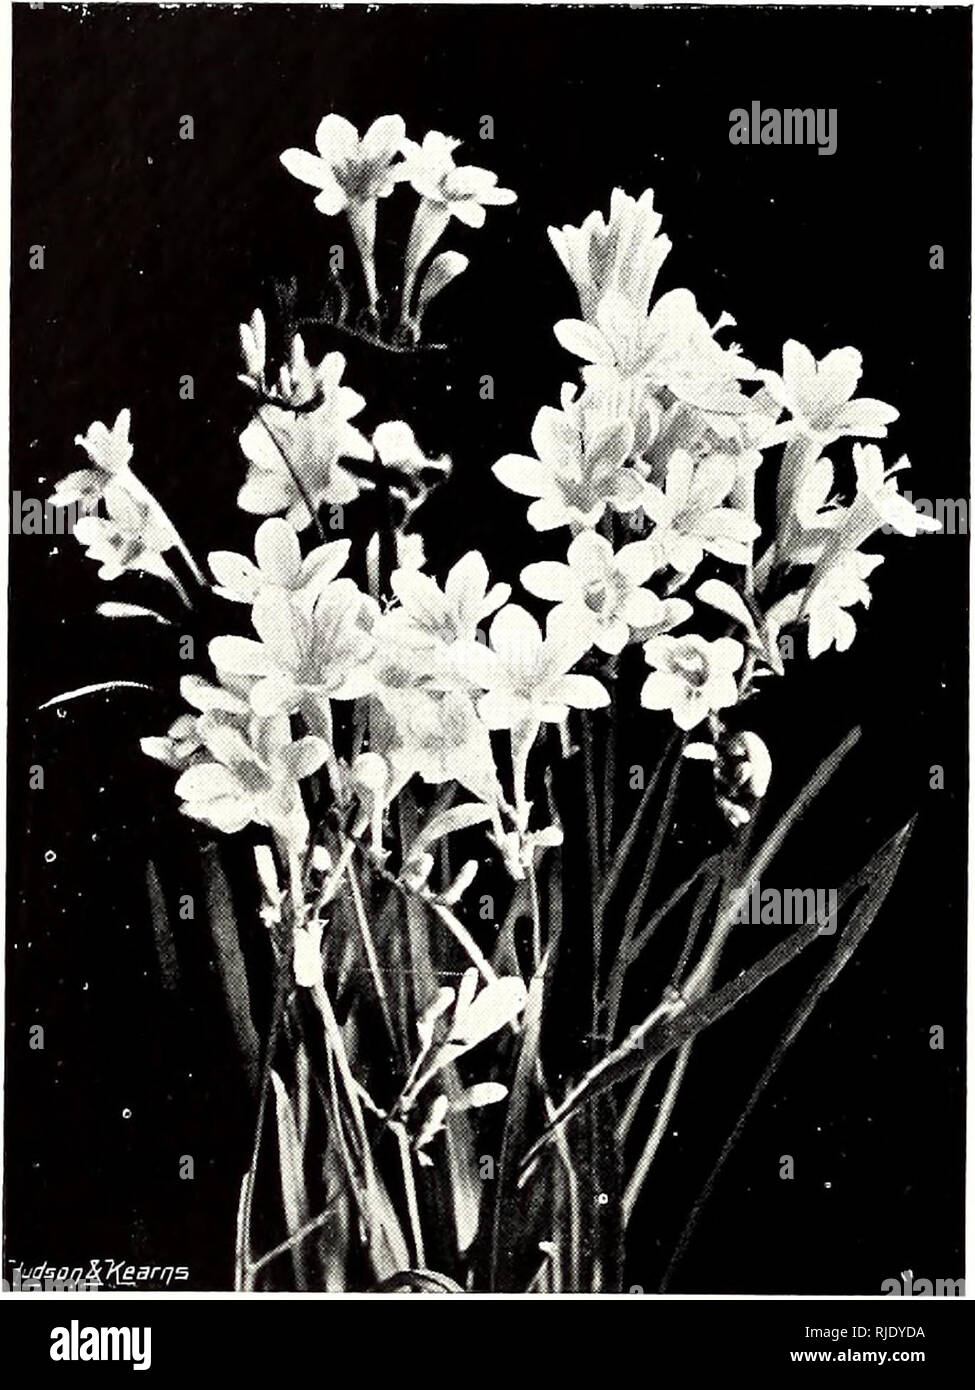 . The century book of gardening; a comprehensive work for every lover of the garden. Gardening. 266 THE CENTURY BOOK OF GARDENING. Eueomis punctata.âA strong-growing bulb, pushing up a number of long, wavy, strap-shaped leaves, arranged in more or less of a vasiform manner. The flower spike, that reaches a height of 2ft. to 3ft., has the upper half closely packed with small greenish flowers, spotted with brown. It is not showy, but very interesting. There are several kinds, but all are much in the same way. Freesias.âThese beautiful South African bulbous plants are now general favourites, the  Stock Photo